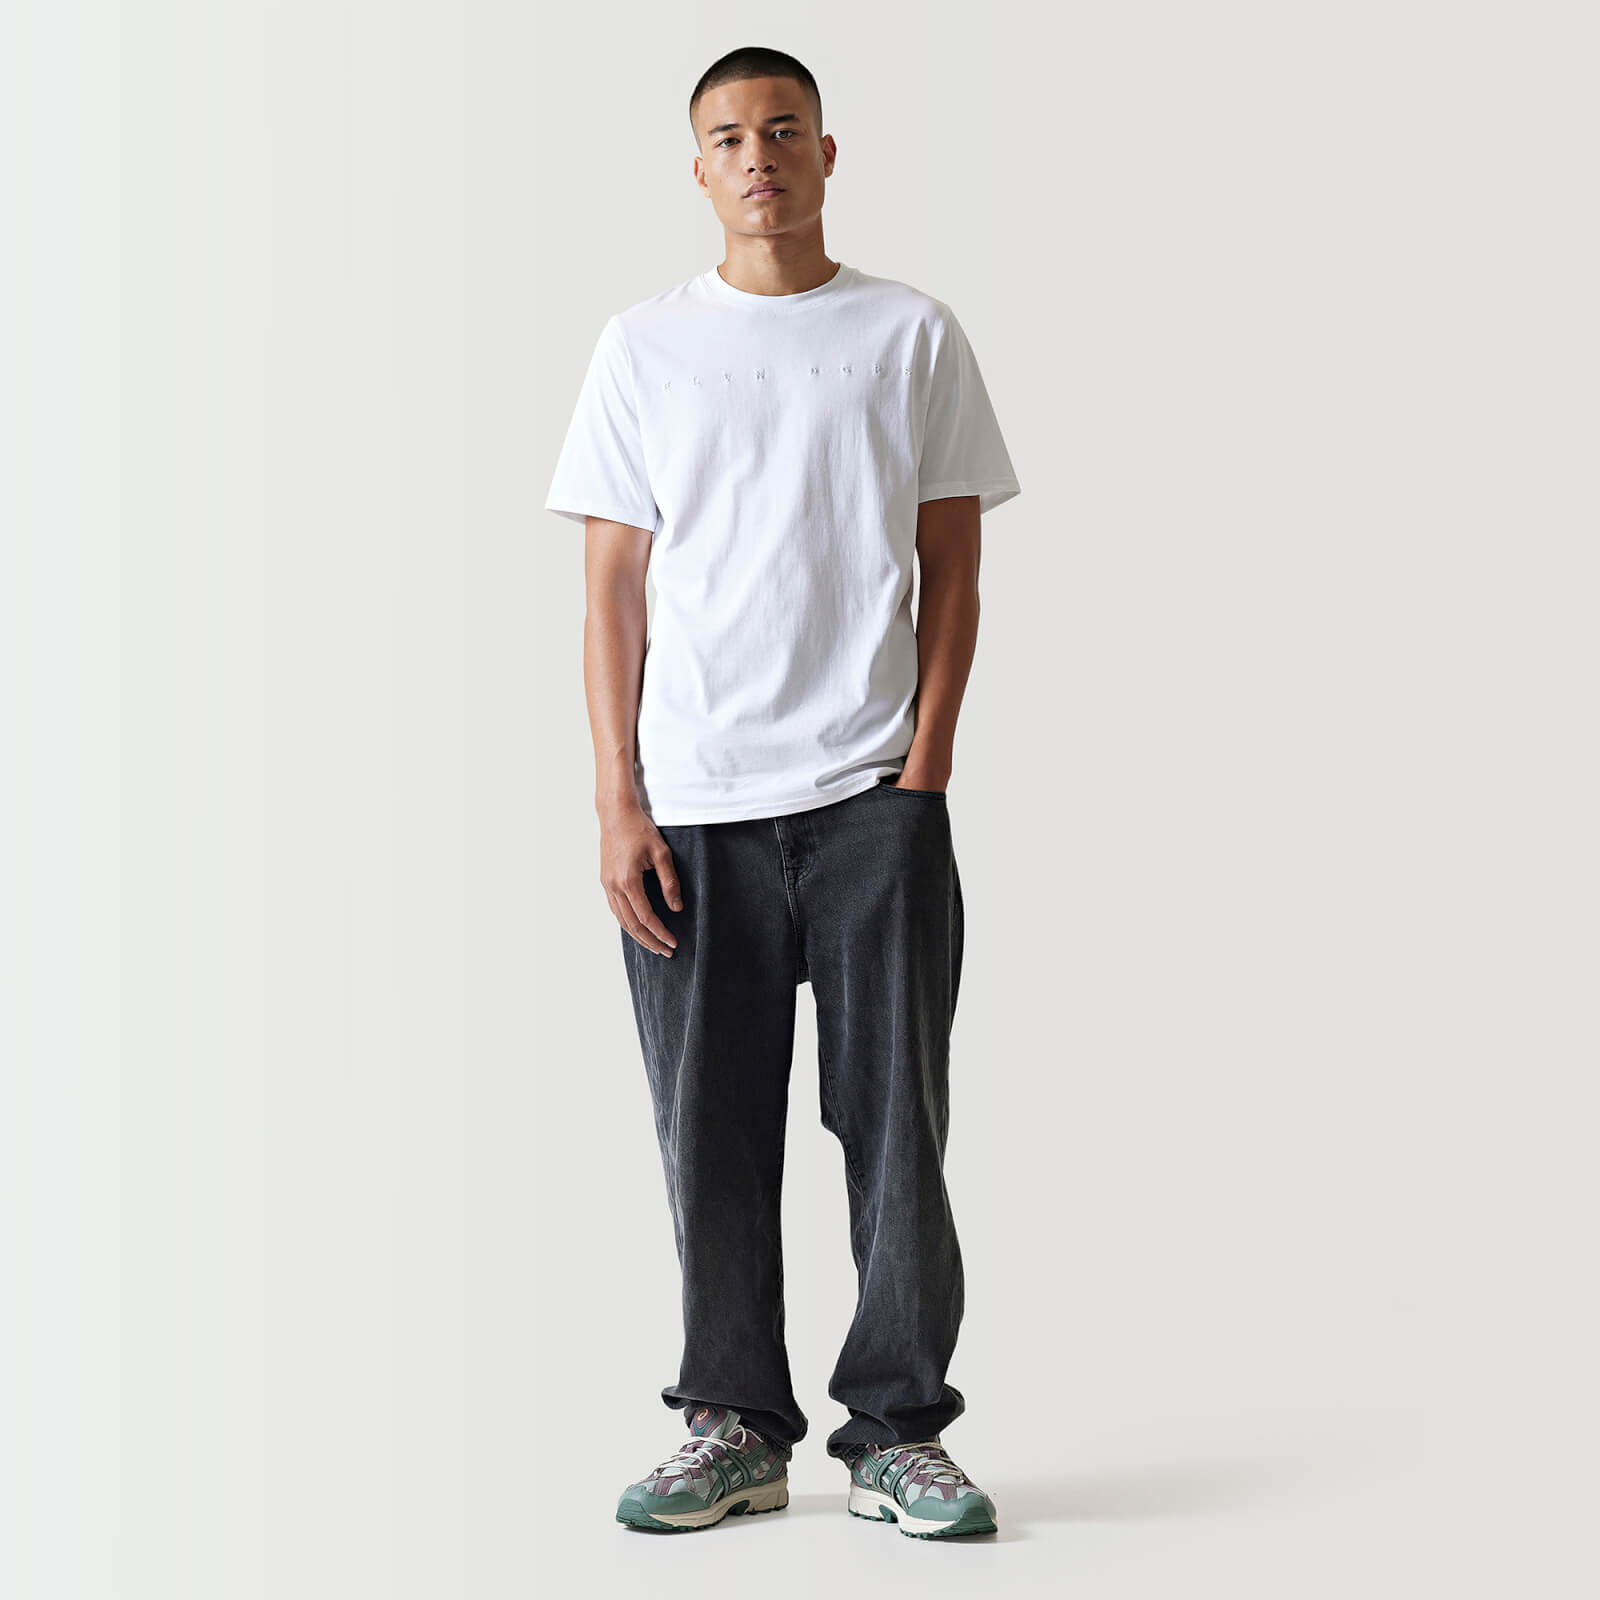 11 Degrees Tonal Embroidery Tee - White - L from 11 Degrees